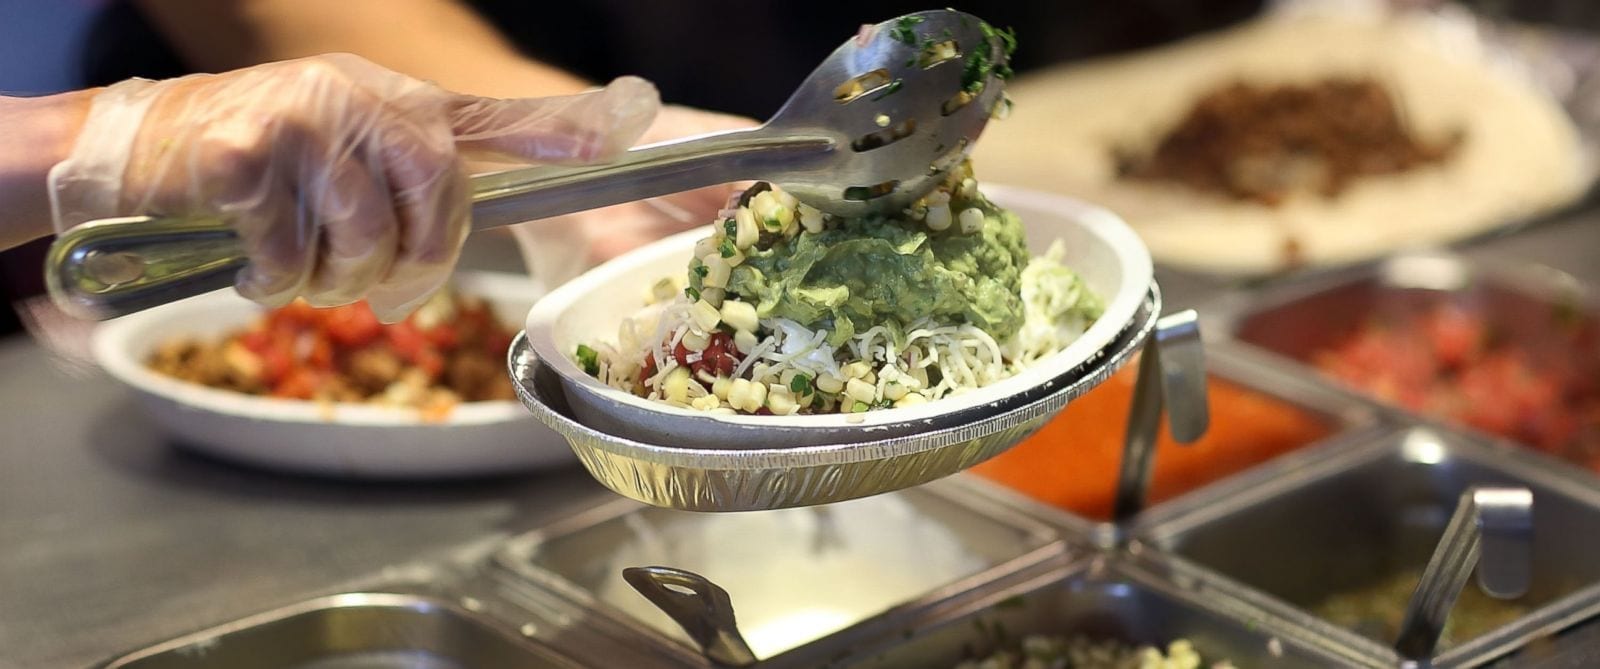 Chipotle Food Safety Concerns Continue -- Rodents Scurry About